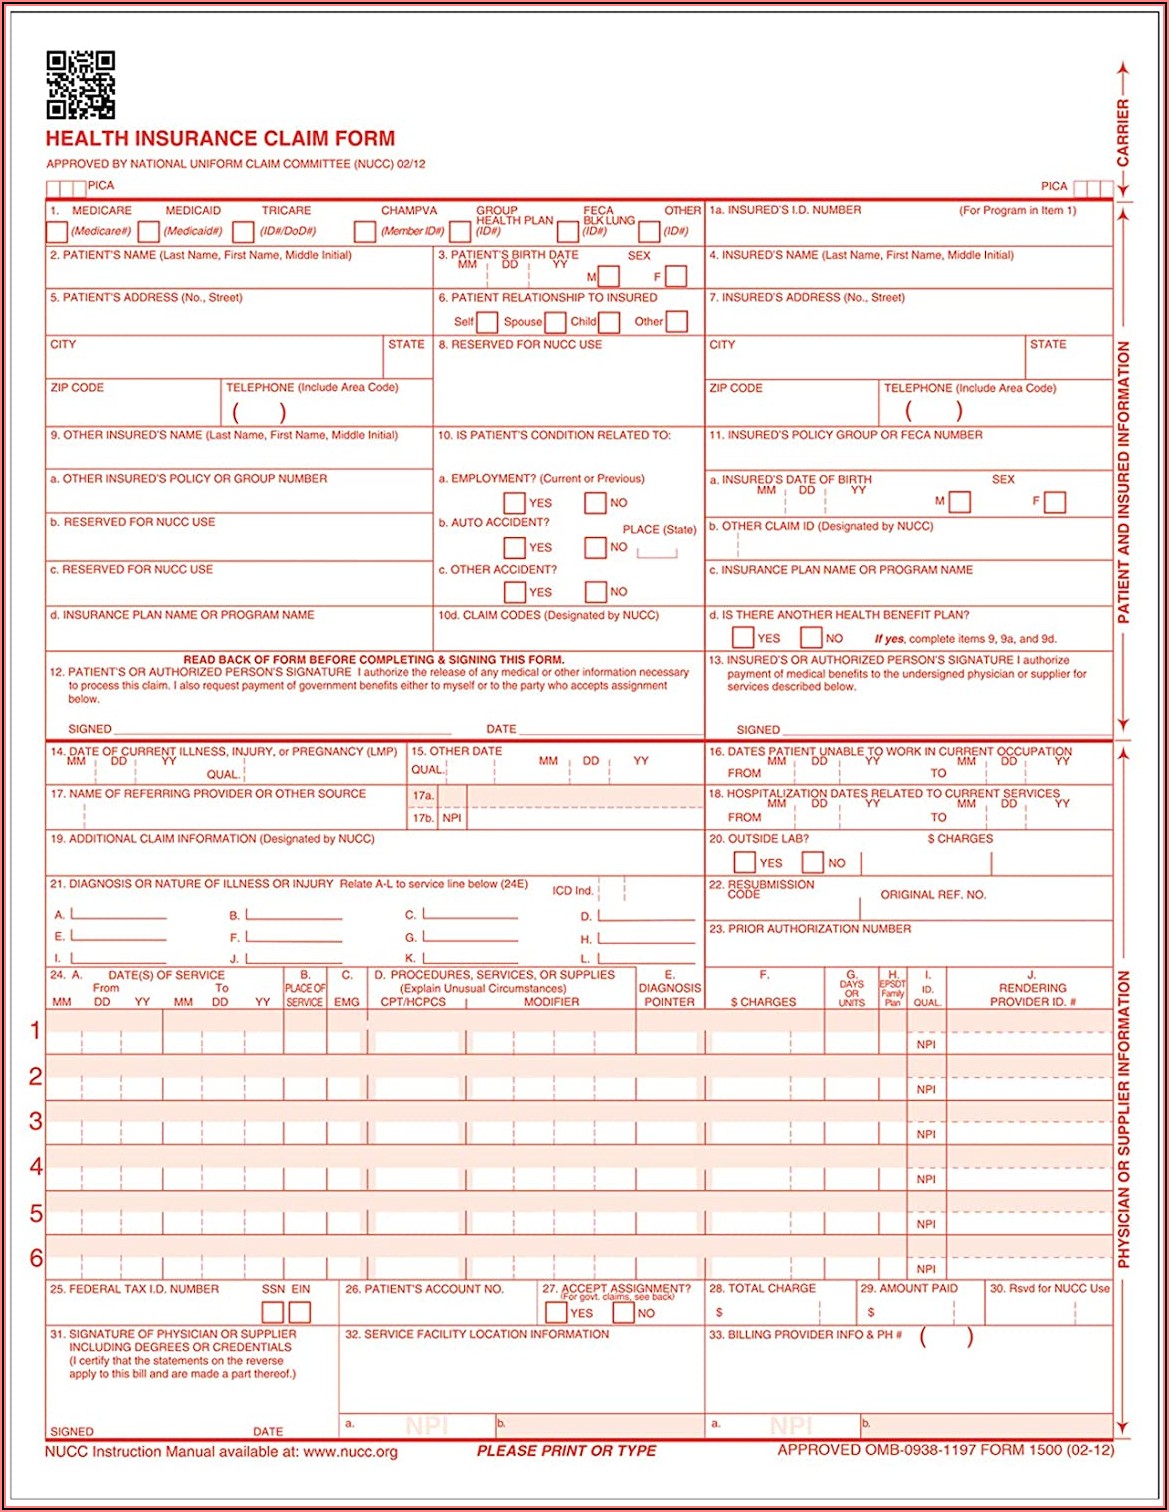 Where To Order Hcfa 1500 Forms